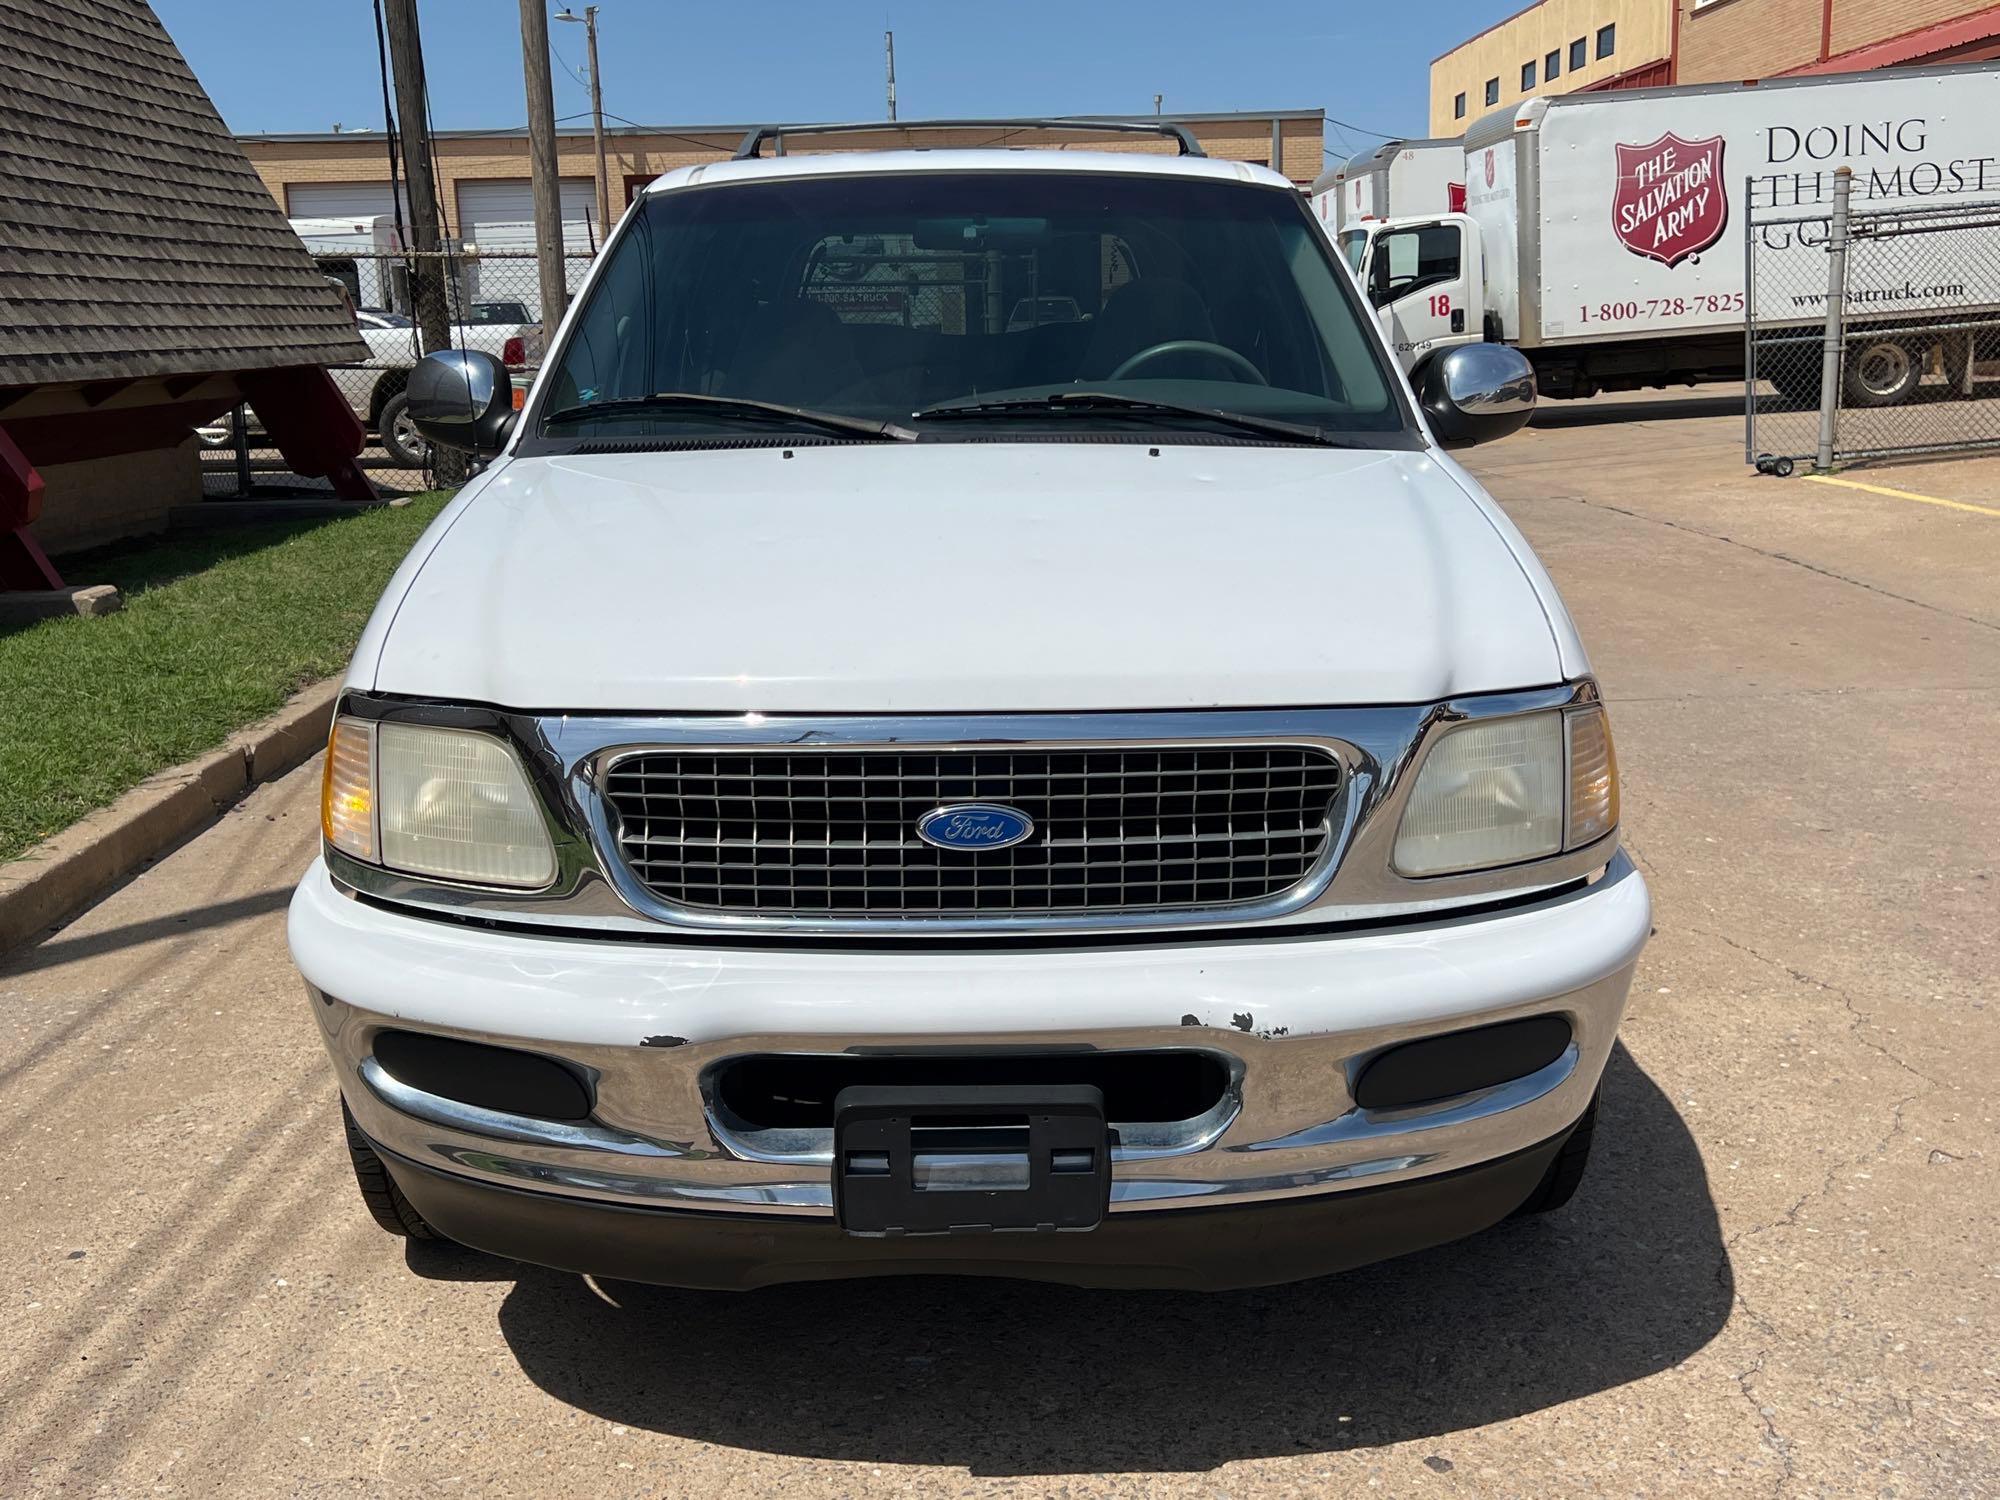 Fishing Equipment, Fire Arms, 2006 Ford Expedition, and more! - DeLozier  Realty & Auction